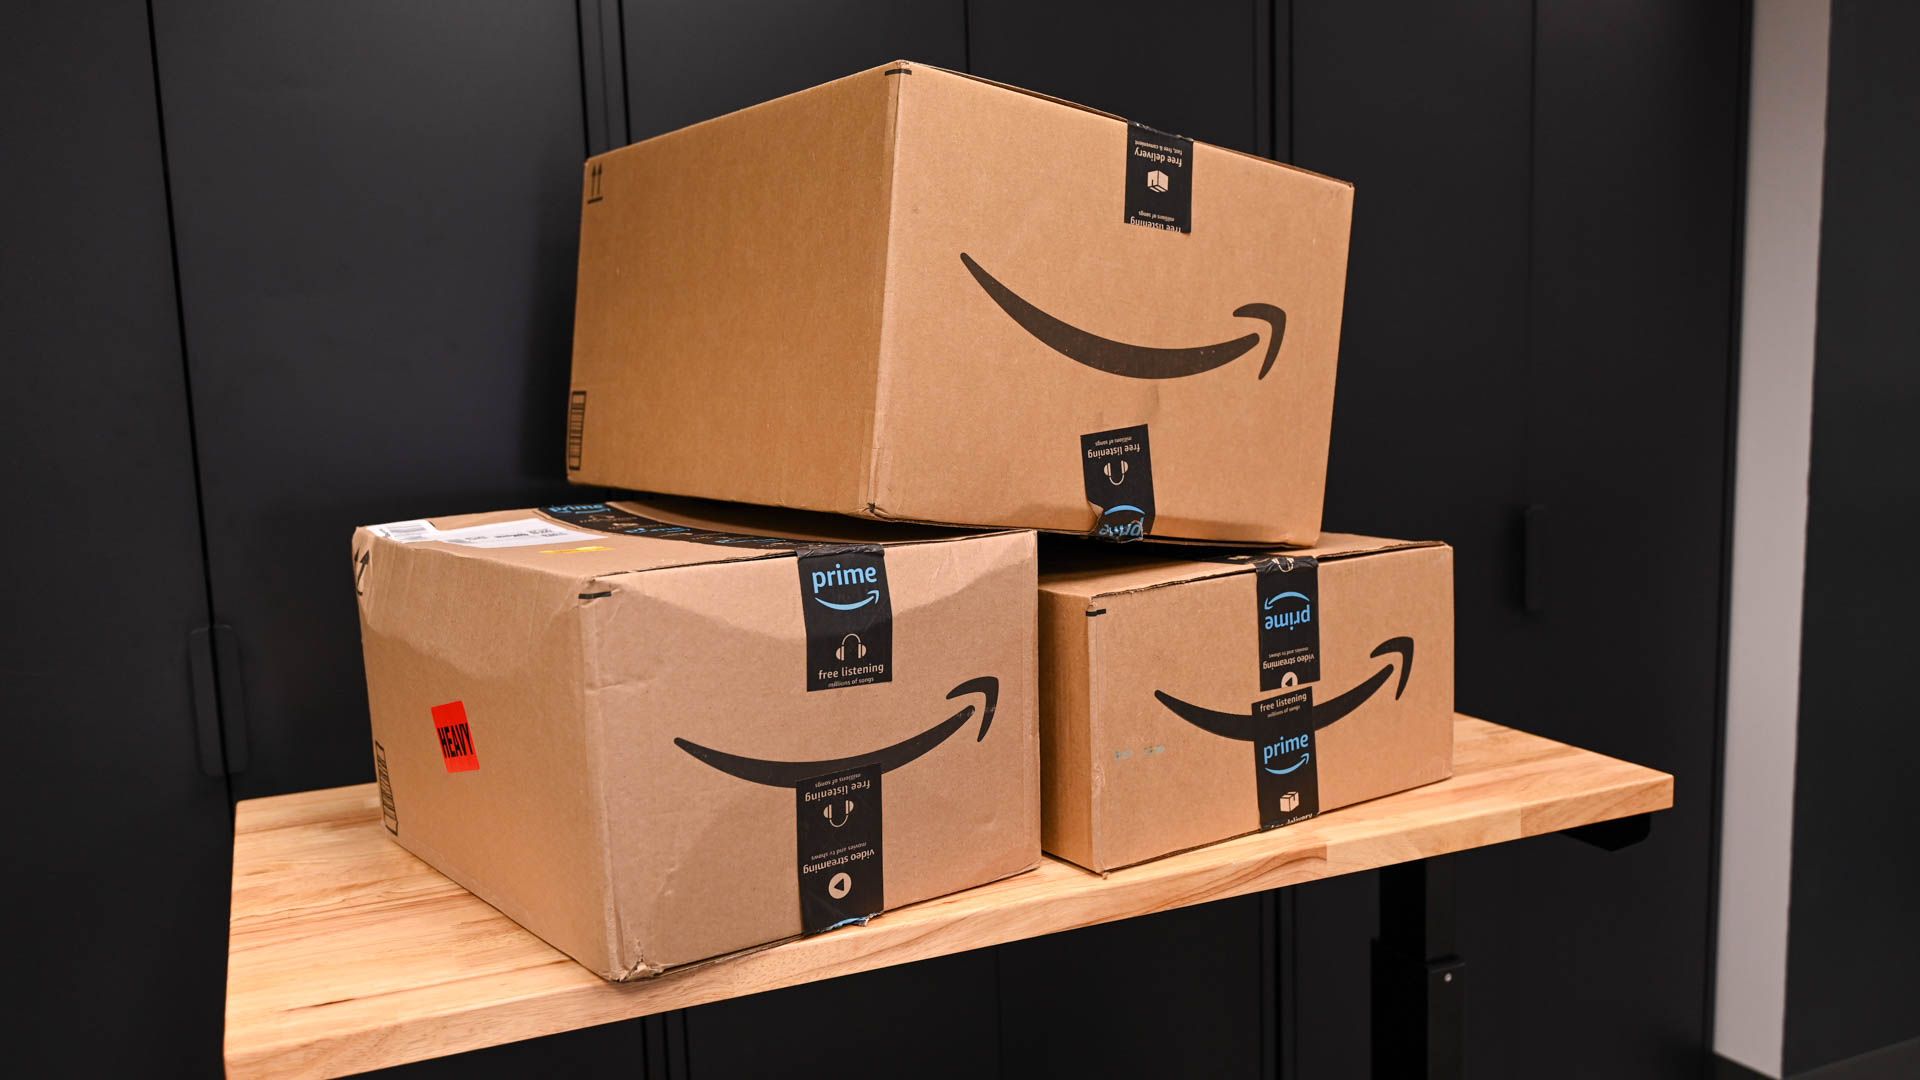 Amazon packages stacked on a workbench